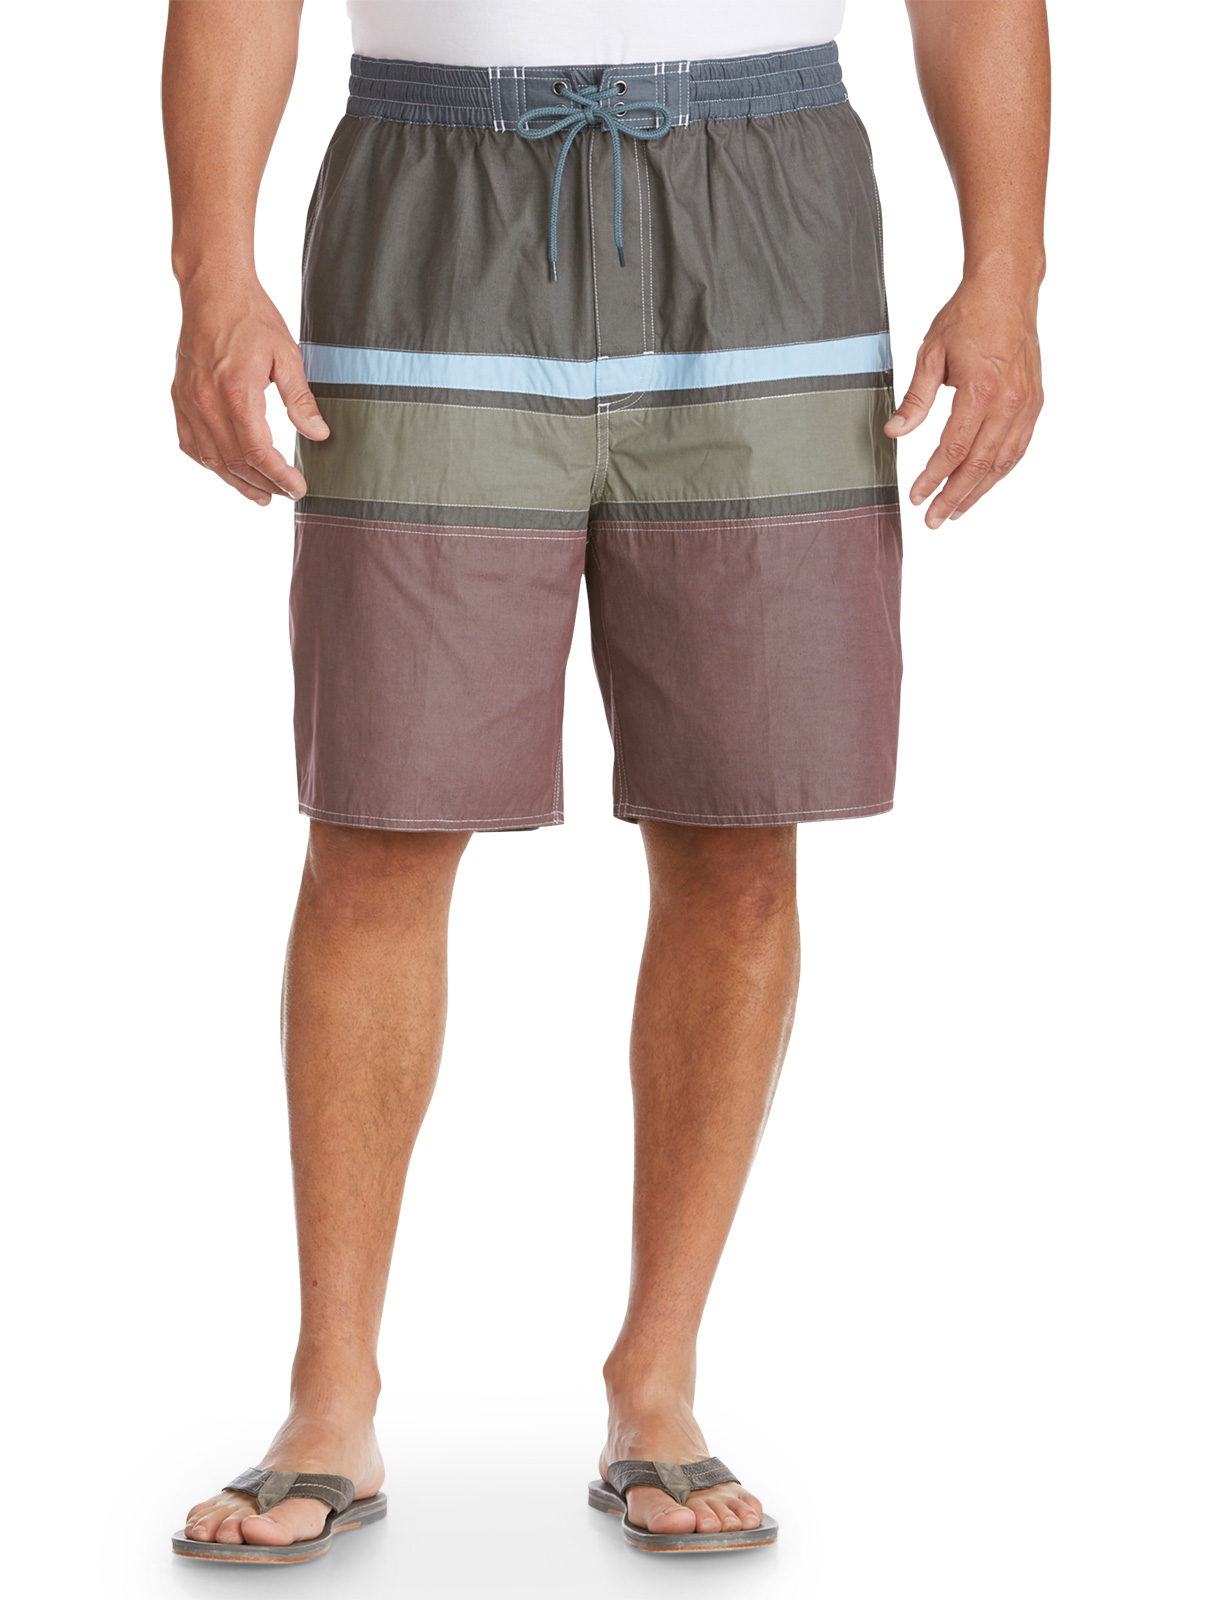 ROCHESTER Men's Big and Tall Colorblock Board Shorts